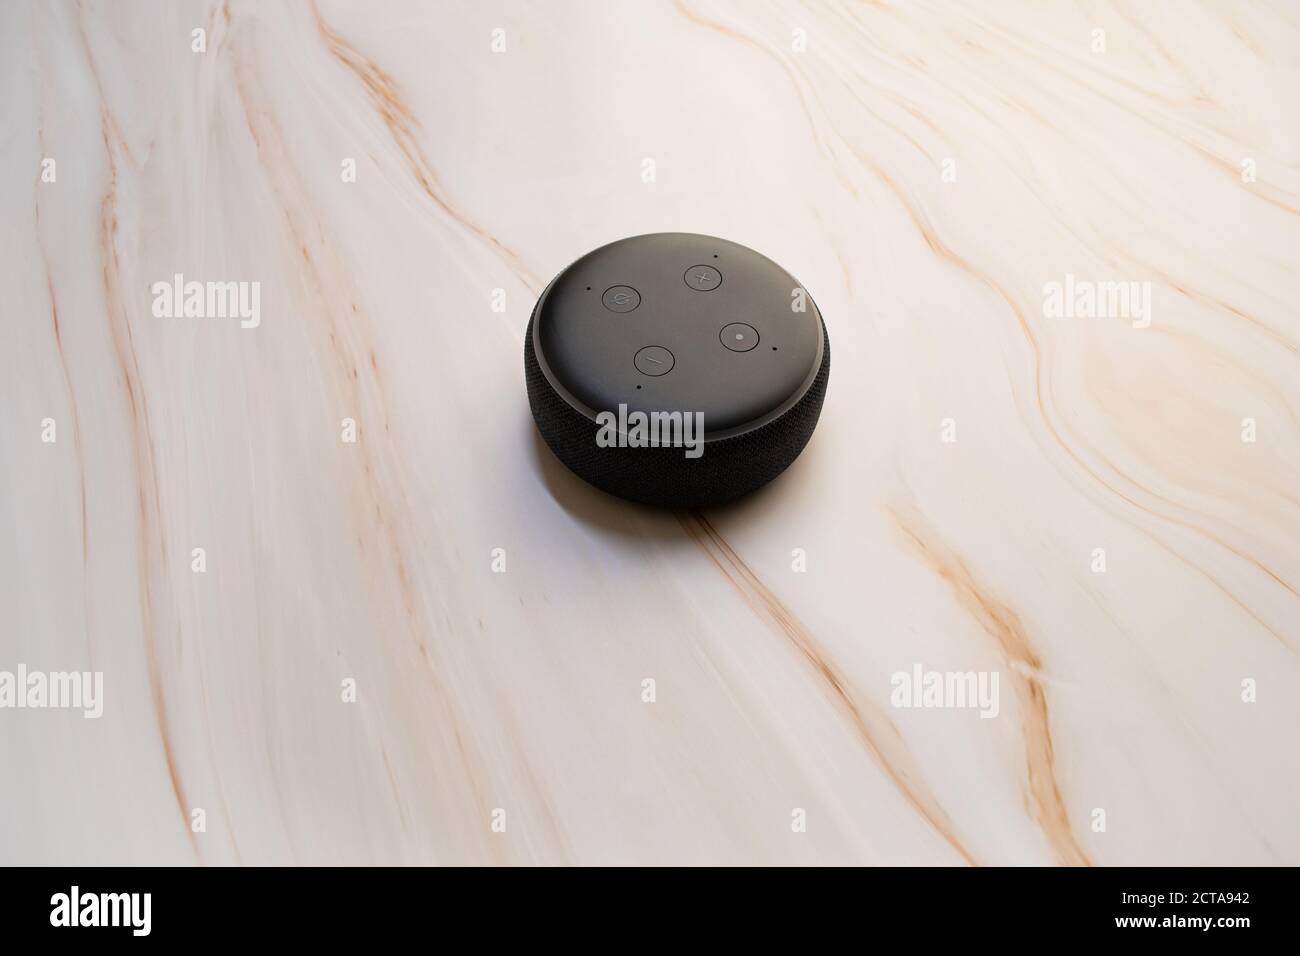 LONDON, UNITED KINGDOM - SEPTEMBER 20 2020: Close-up of an Amazon Echo Dot, the virtual assistant speaker, with an expensive modern marble background. Stock Photo